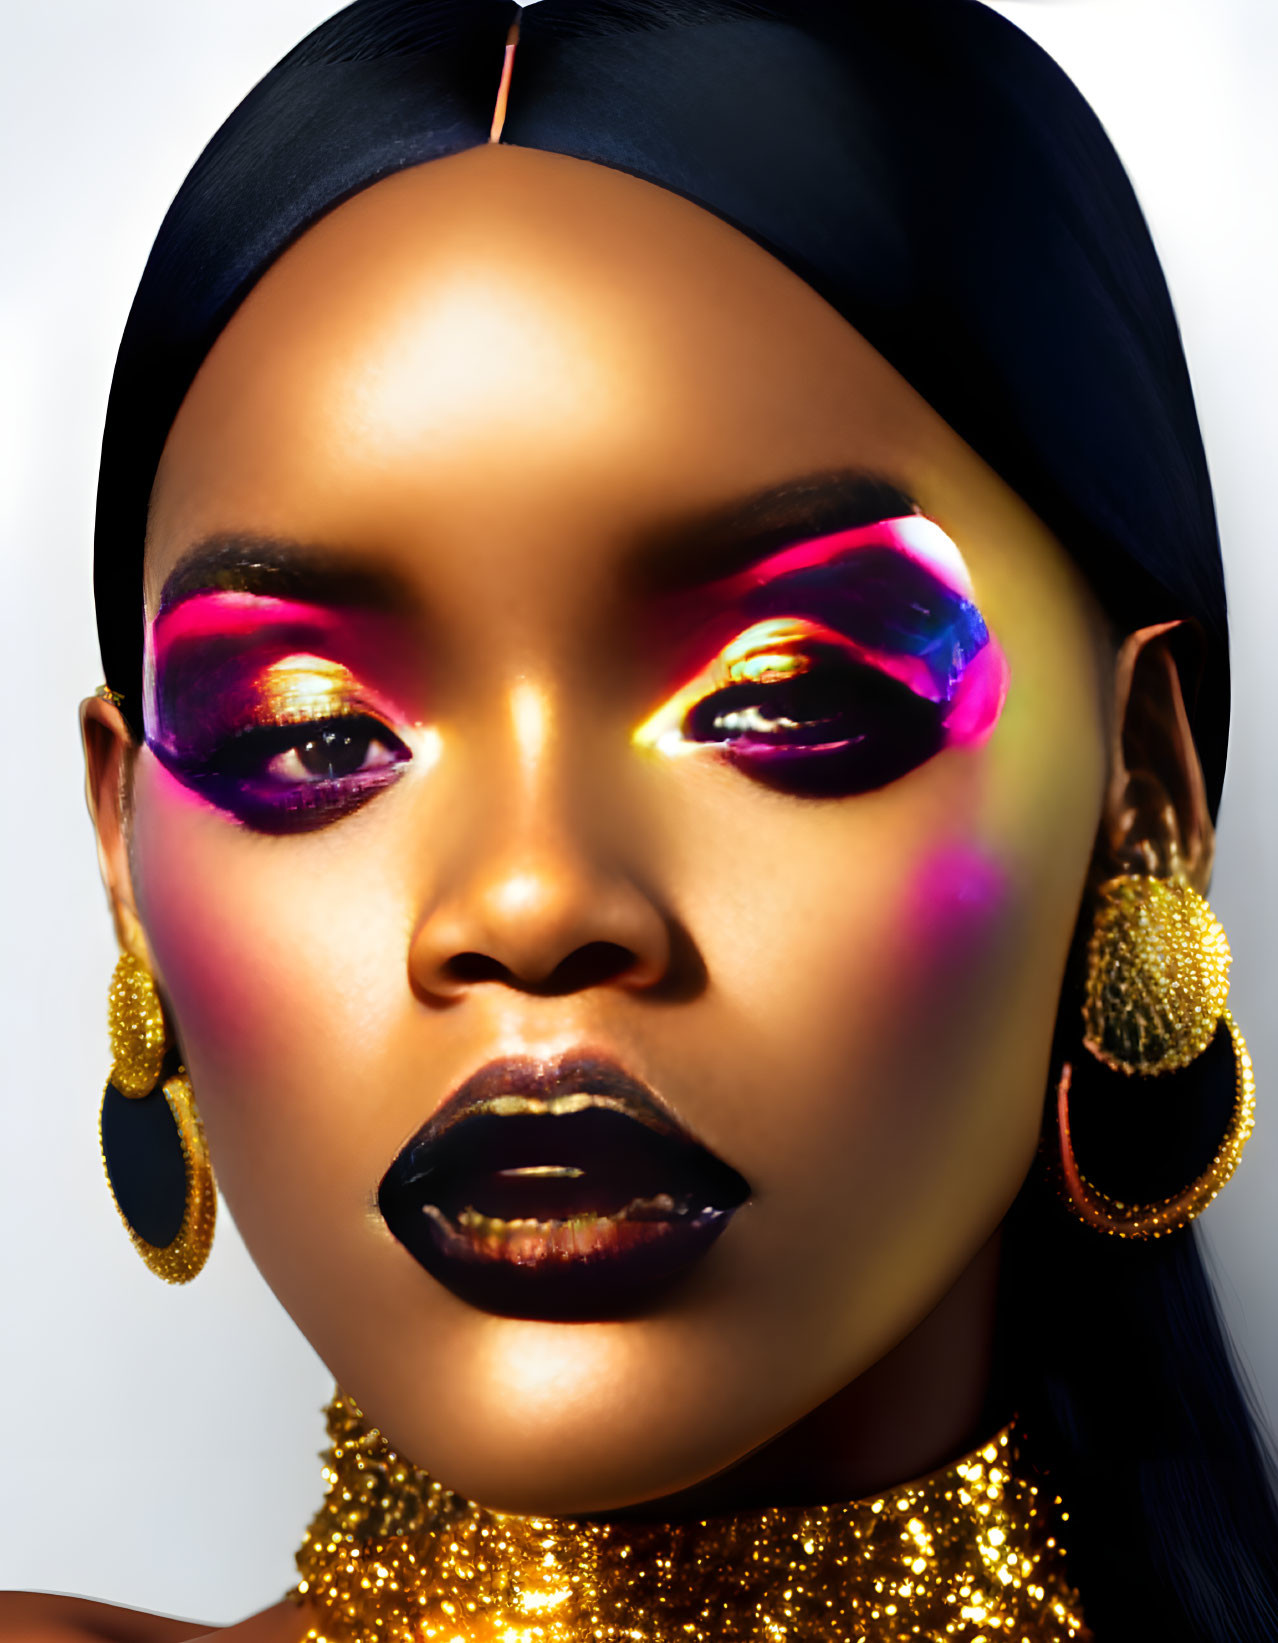 Woman with Bold Makeup and Golden Accessories on Light Background